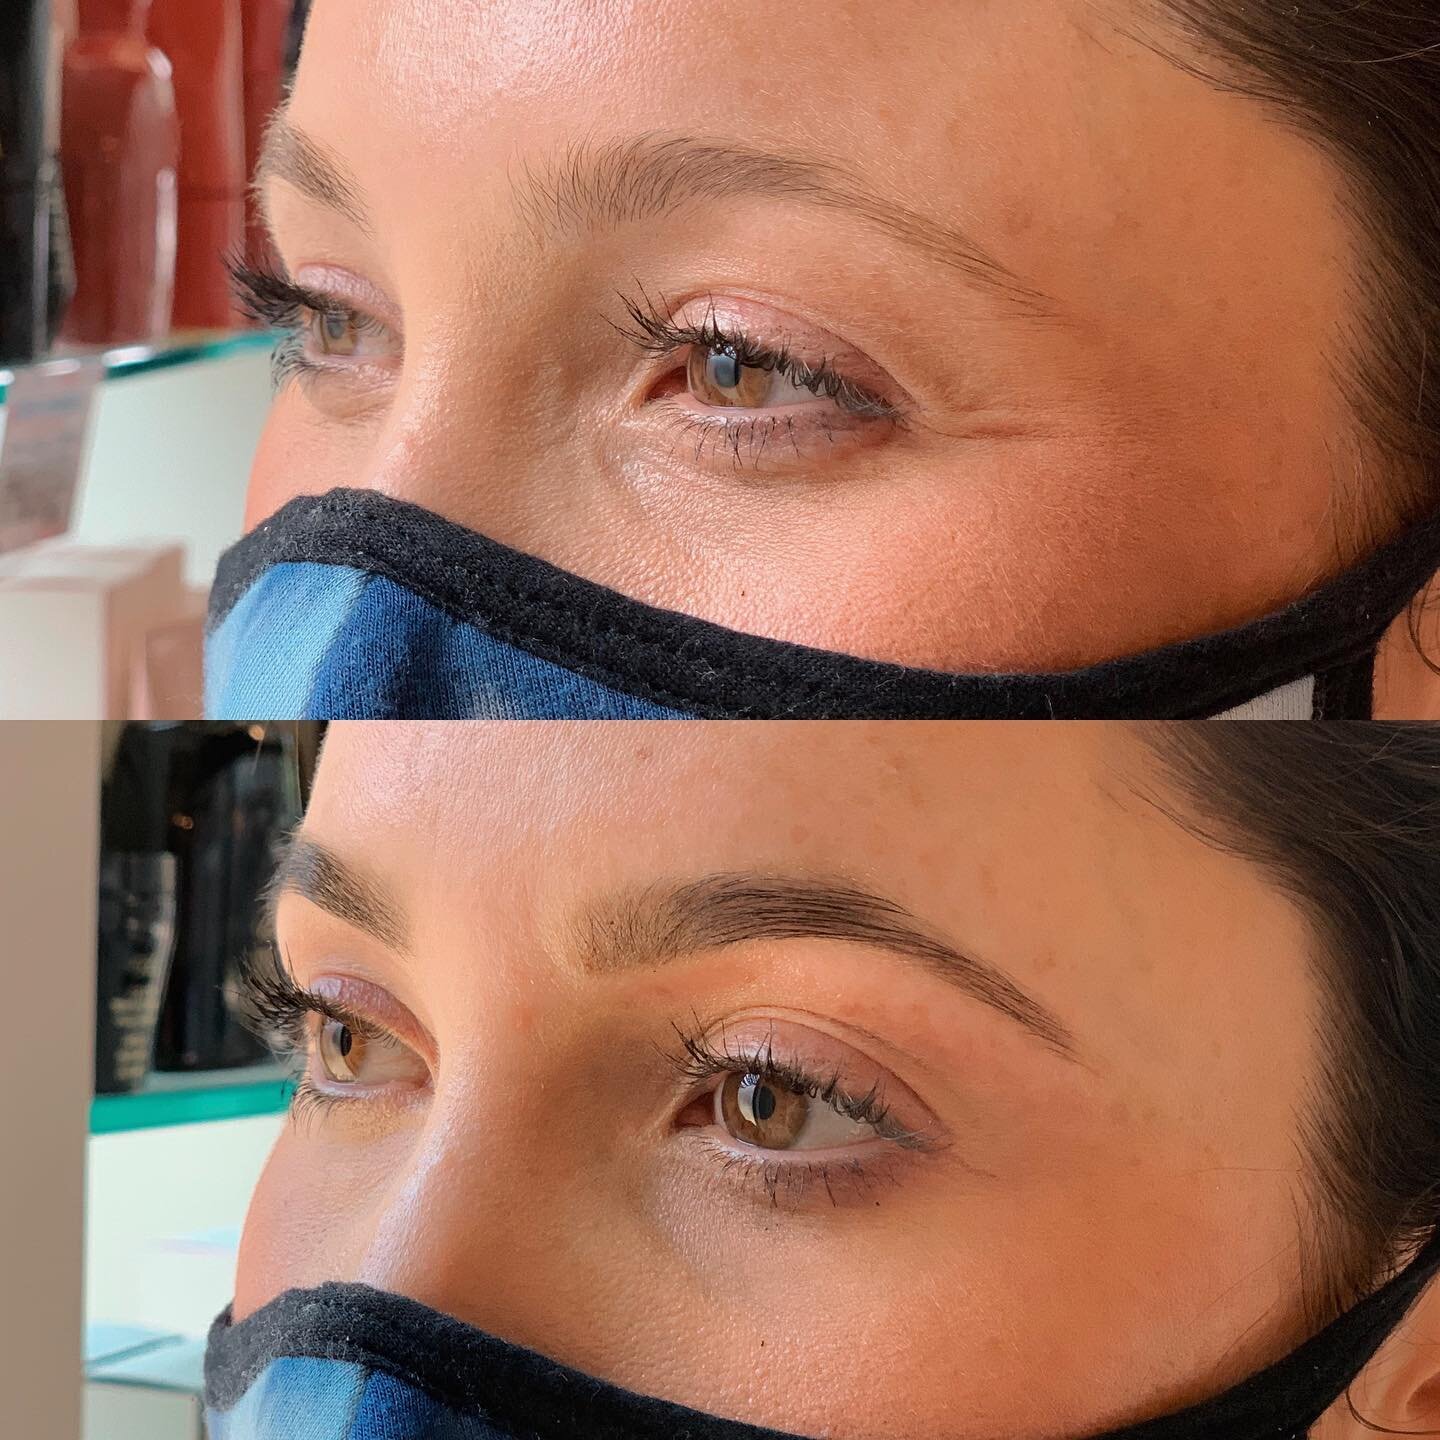 Cleannn clean ups✨for @laurenelizabeth28 Thanks for coming in girl! 😍
.
.
.

#beforeandafter #tintandshape #chicagobrows #yourbrowgirl #chicagoesthetician #eyebrows #naturalbeauty #chicagobrowexpert #besteyebrows #lashtint #booksopen #browtinting #e